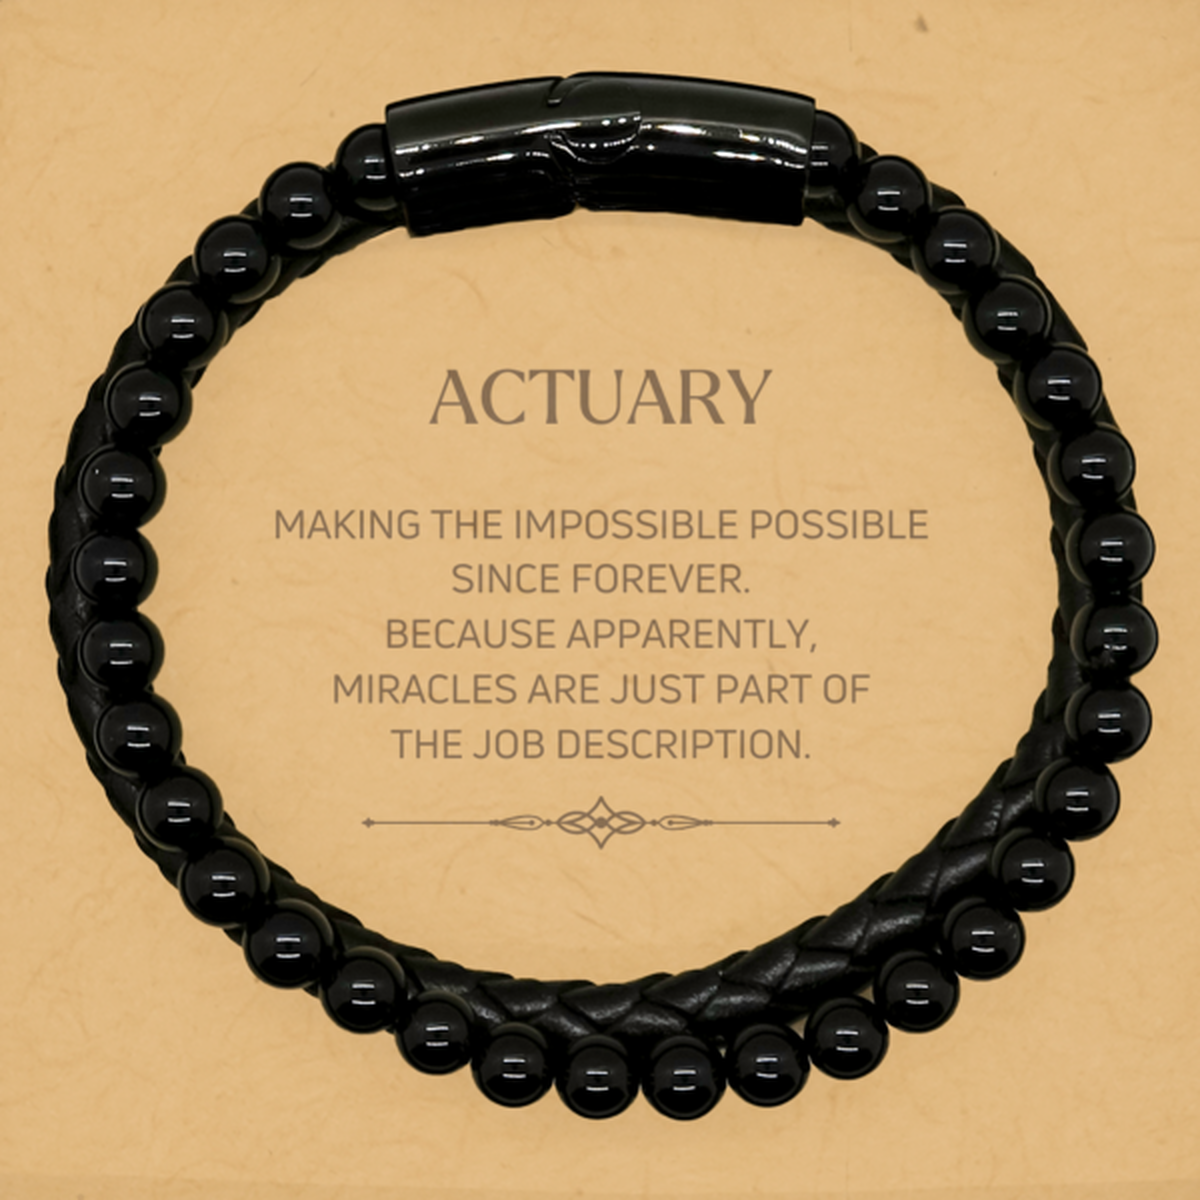 Funny Actuary Gifts, Miracles are just part of the job description, Inspirational Birthday Stone Leather Bracelets For Actuary, Men, Women, Coworkers, Friends, Boss